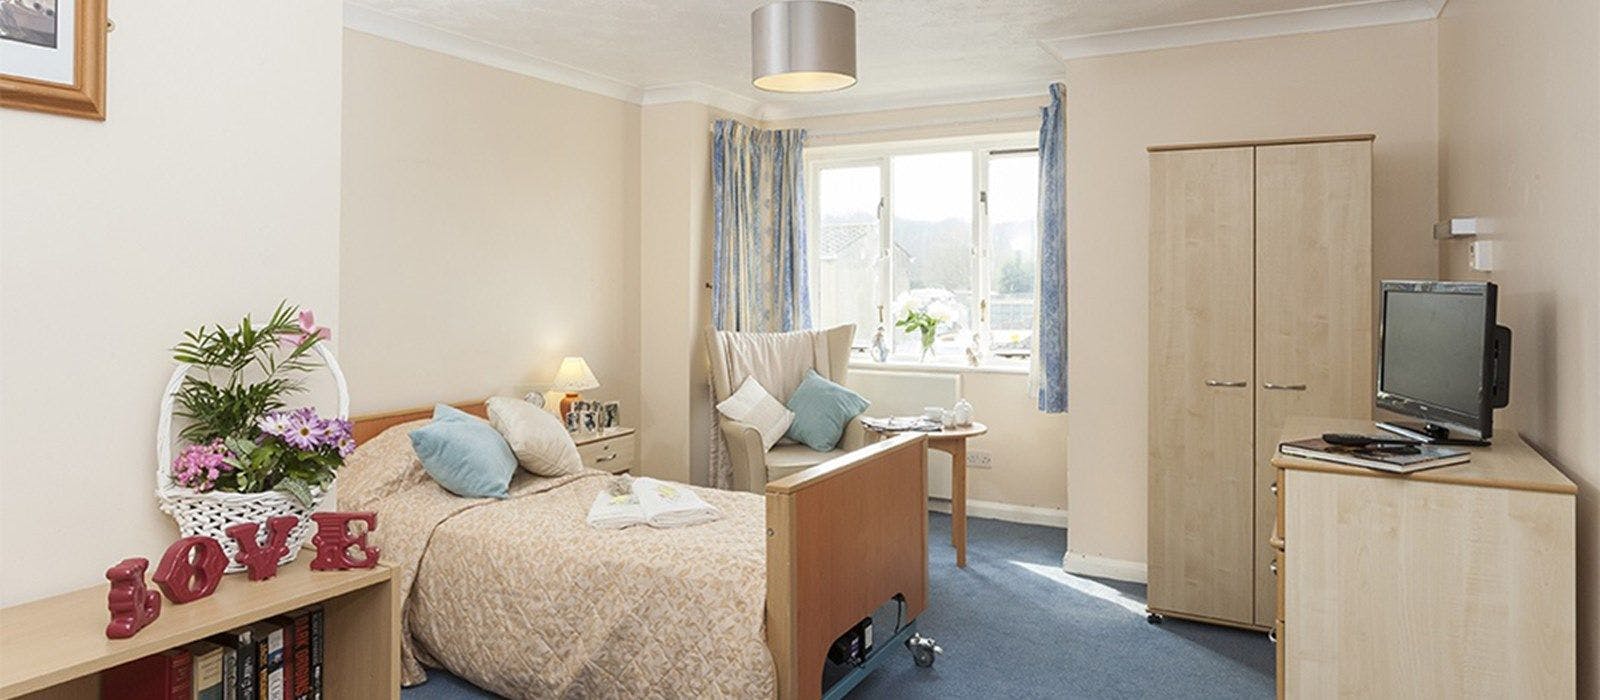 Four Seasons Health Care - Copper Beeches care home 2